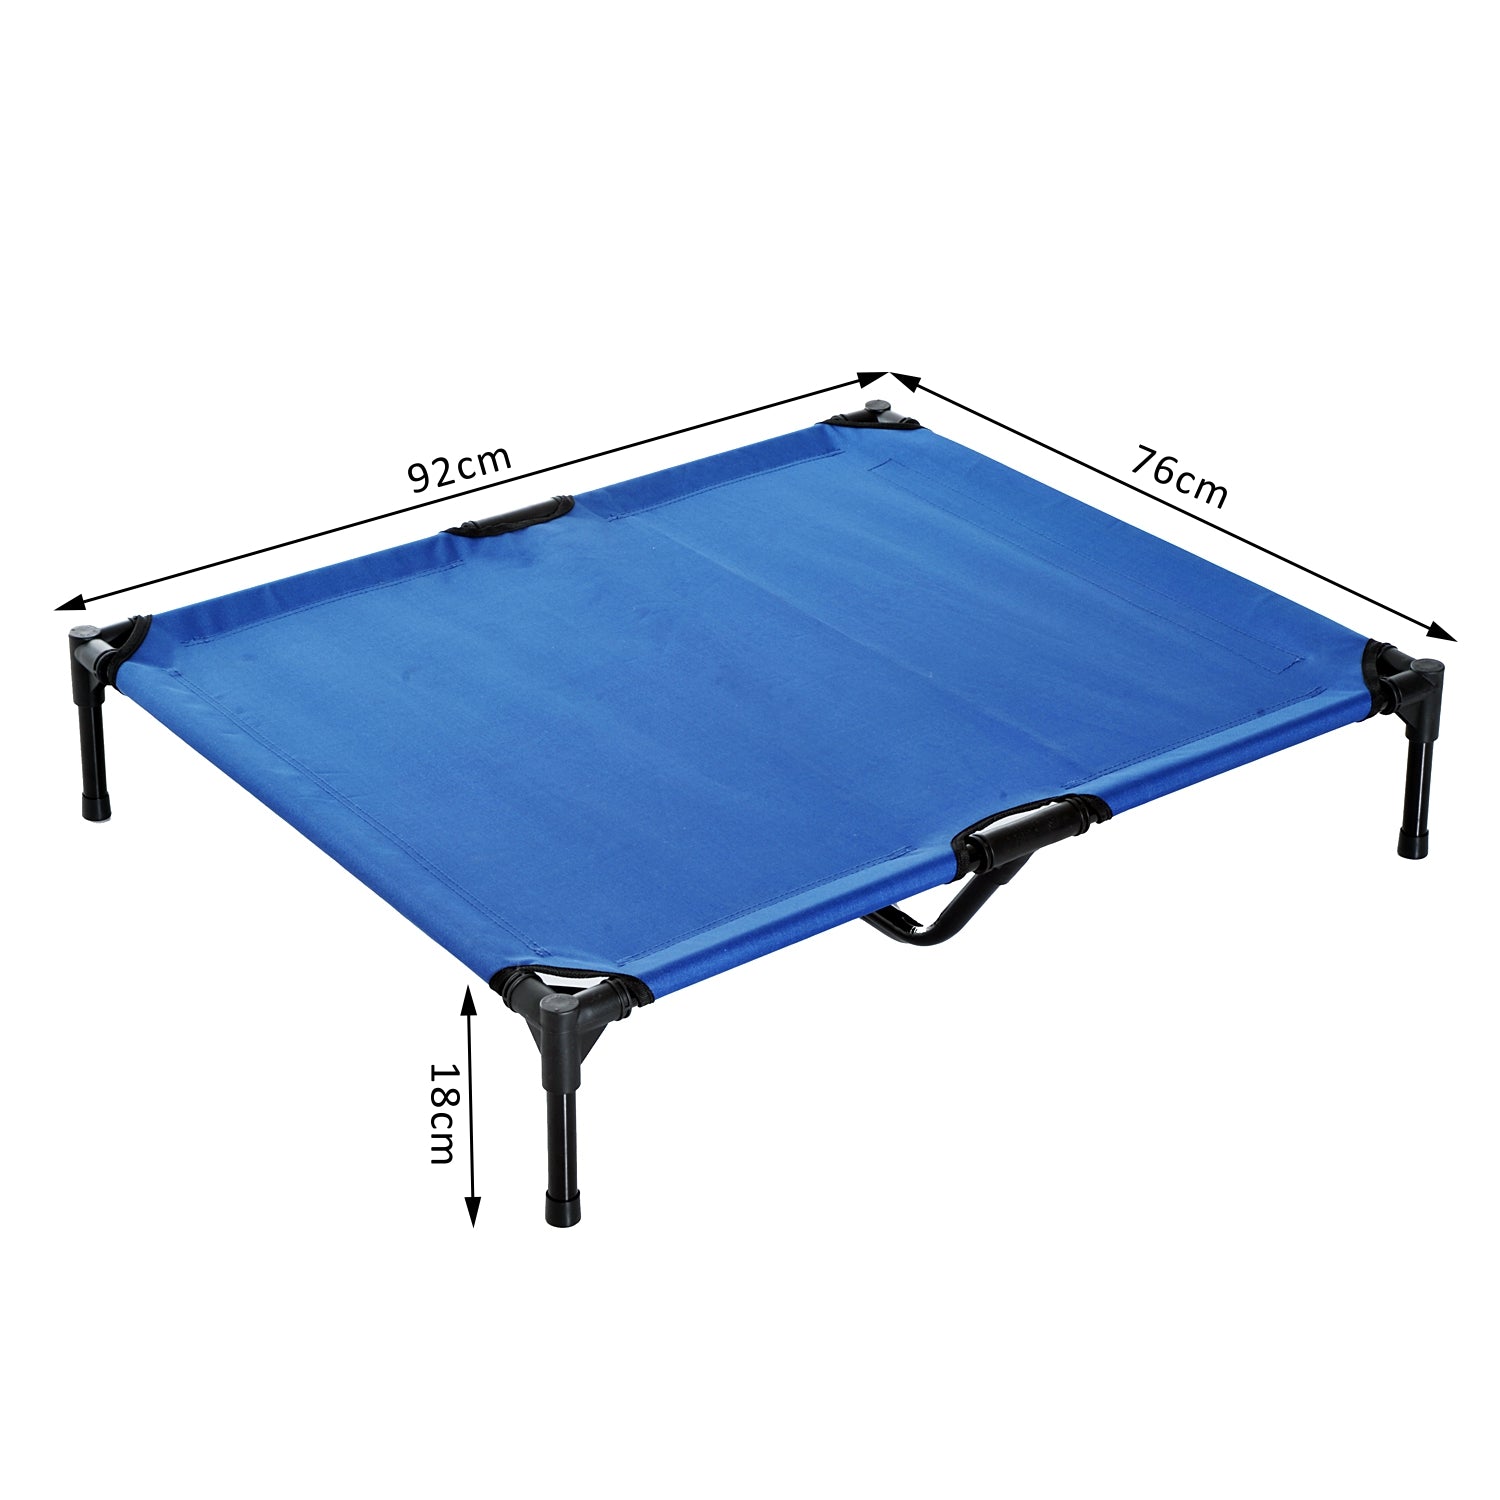 Large Dogs Portable Elevated Fabric Bed for Camping Outdoors Blue